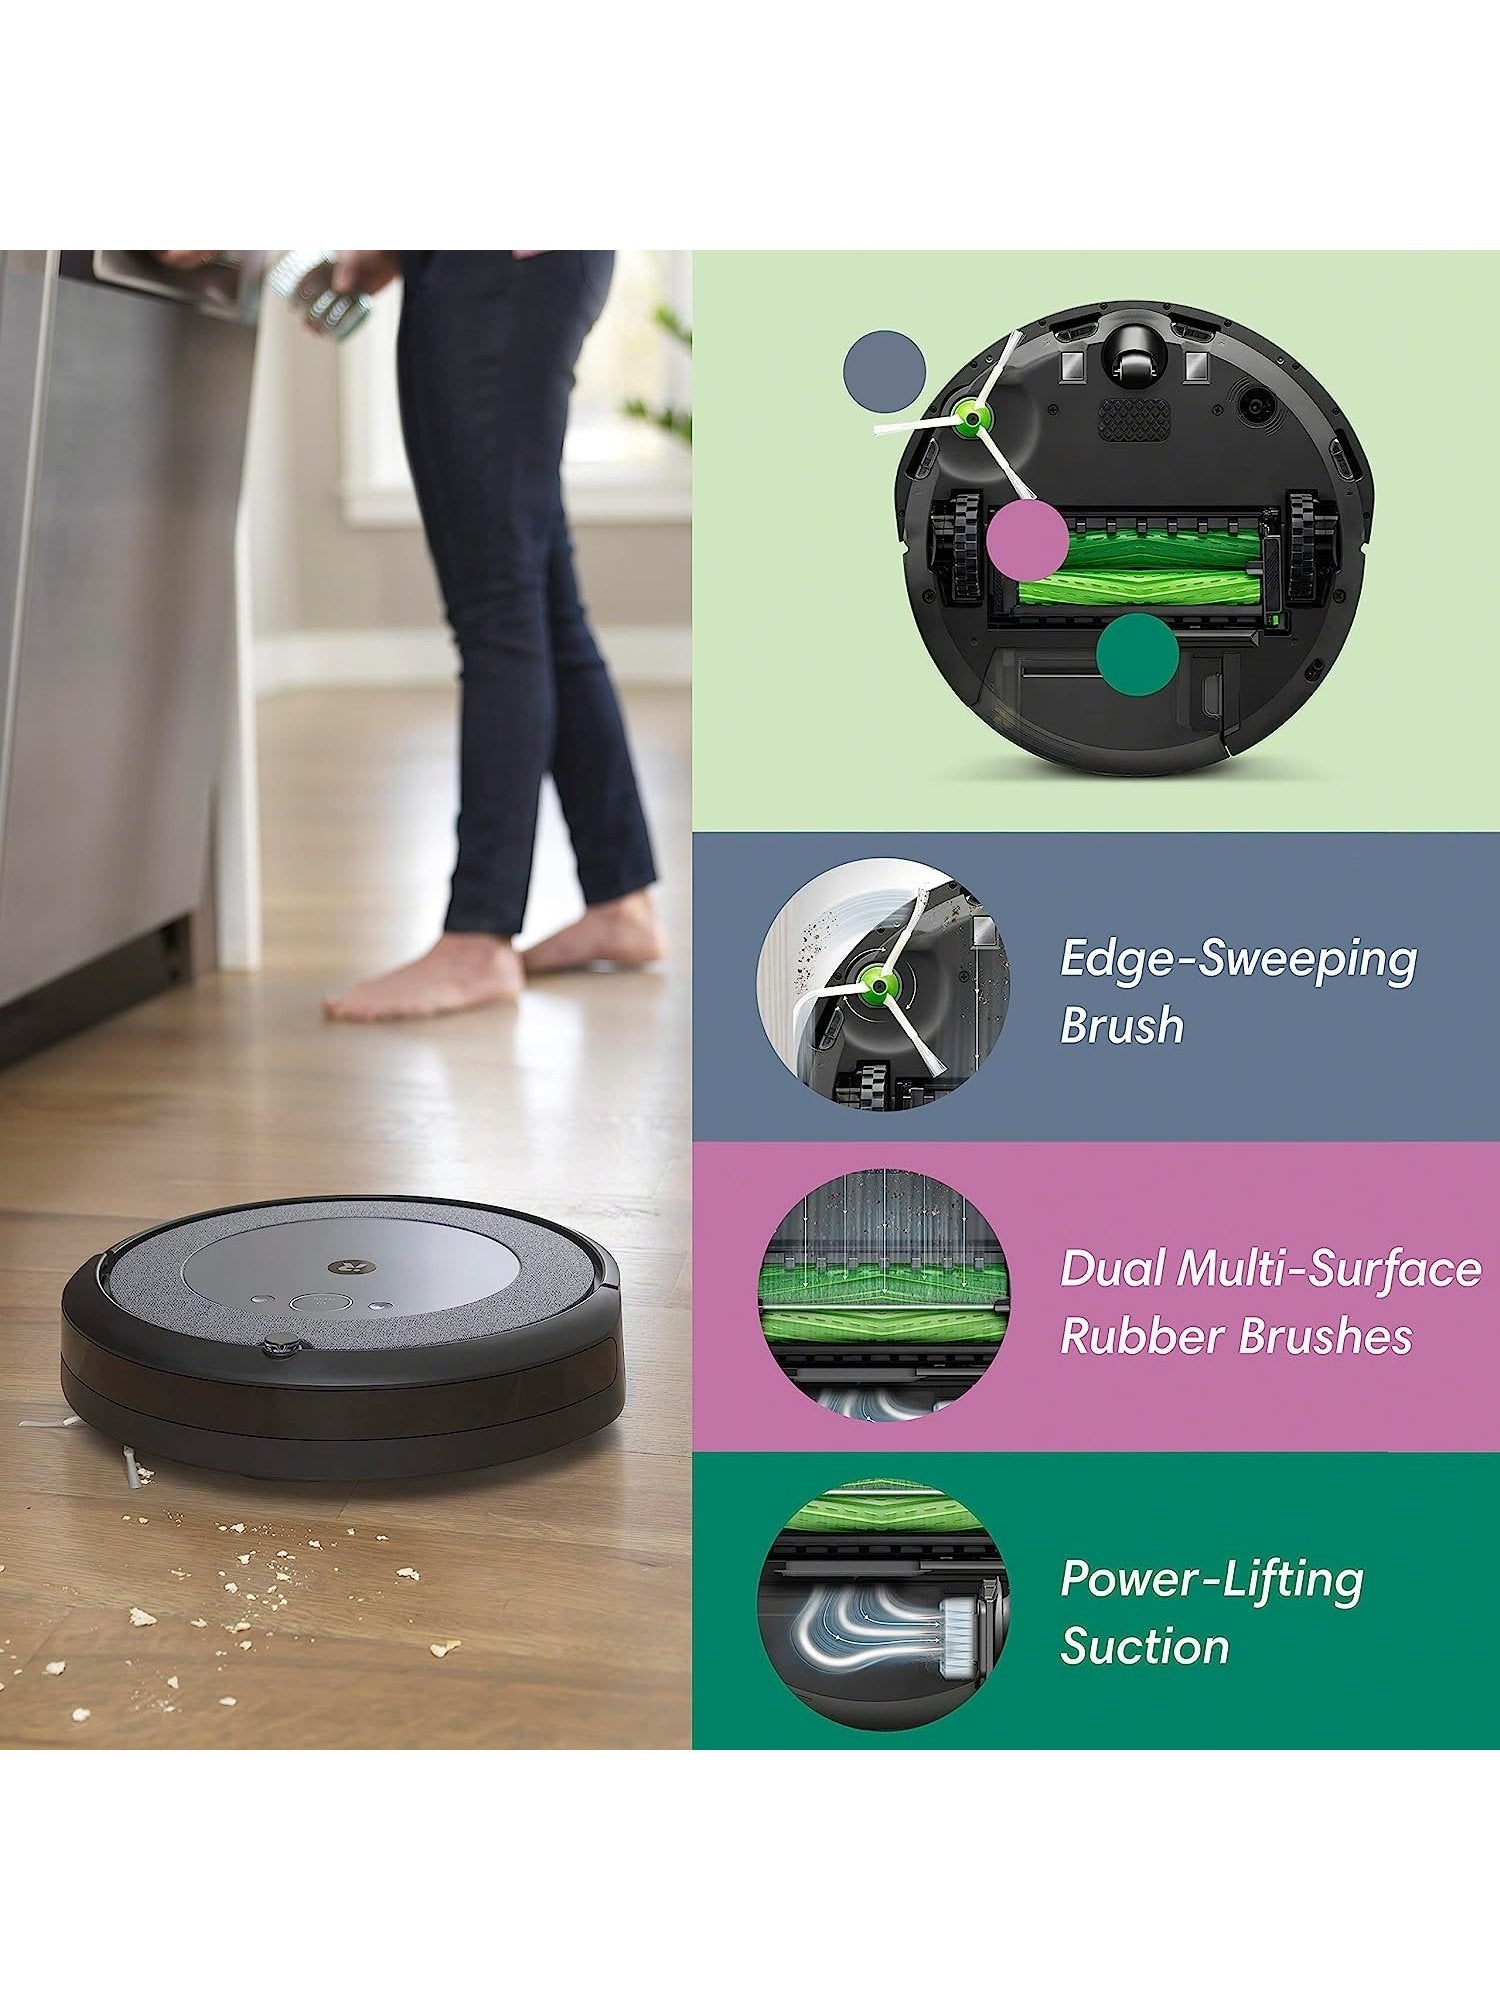 iRobot Roomba i4+ EVO Self Emptying Robot Vacuum - Empties Itself for up to 60 Days, Clean by Room with Smart Mapping, Compatible with Alexa, Ideal for Pet Hair, Carpets